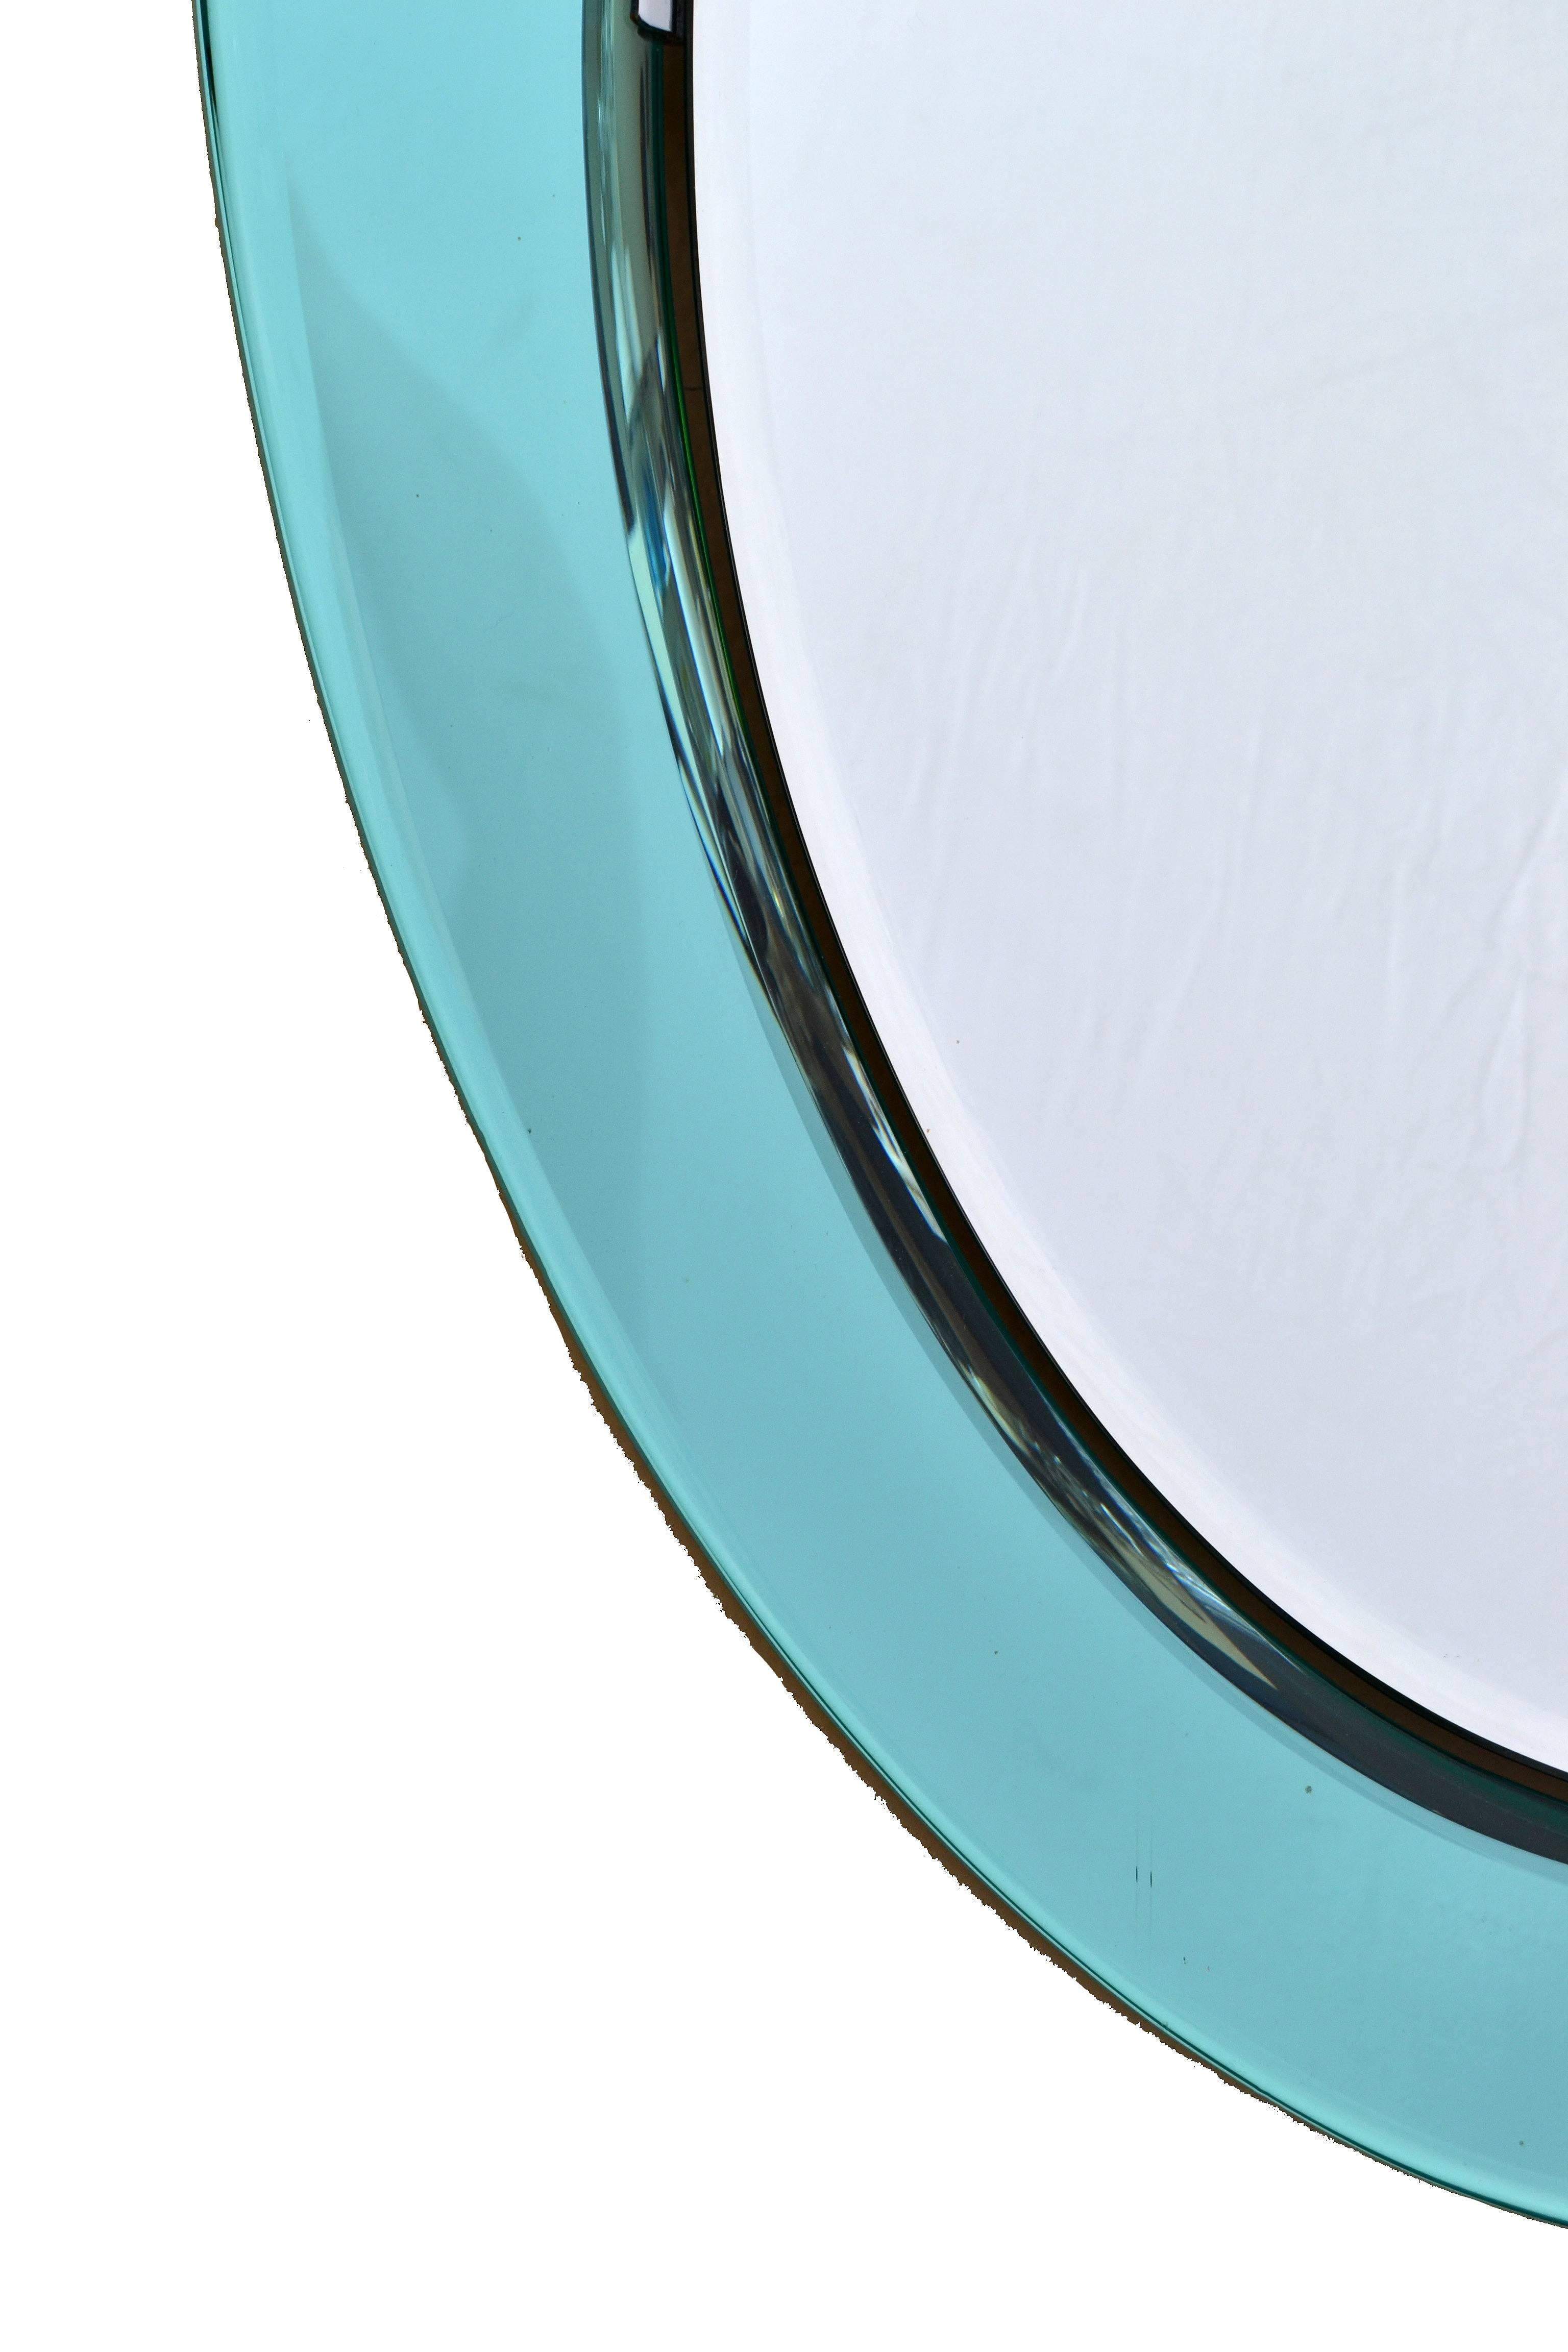 Fontana Arte oval mirror.
Two tone colored mirror glass on a wooden backing.
Overall a Classic design with the flair from Italy.